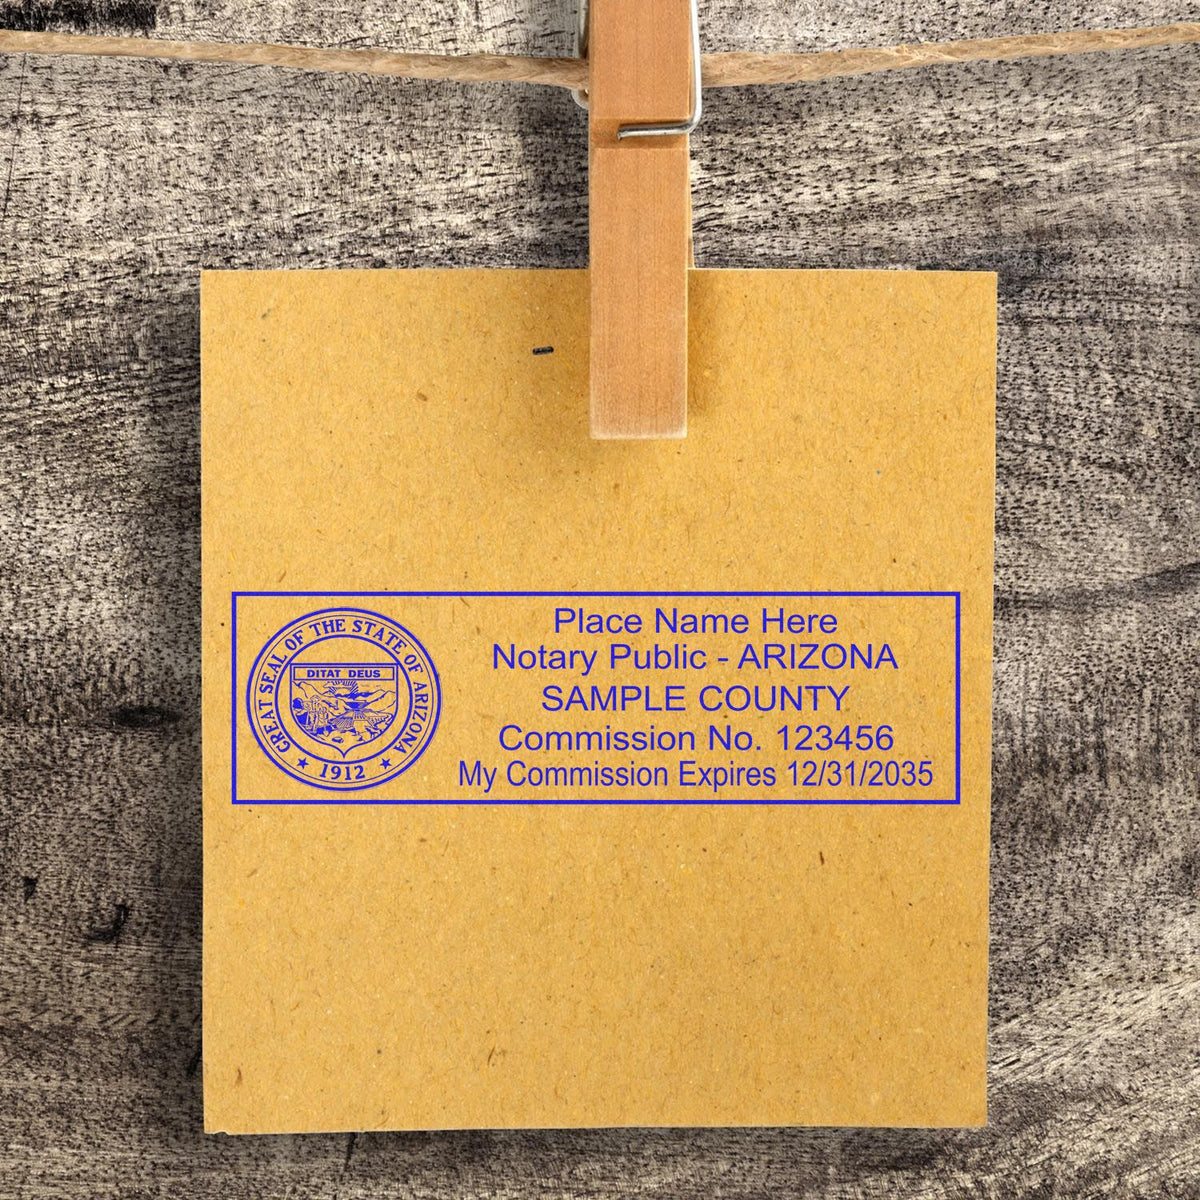 The MaxLight Premium Pre-Inked Arizona State Seal Notarial Stamp stamp impression comes to life with a crisp, detailed photo on paper - showcasing true professional quality.